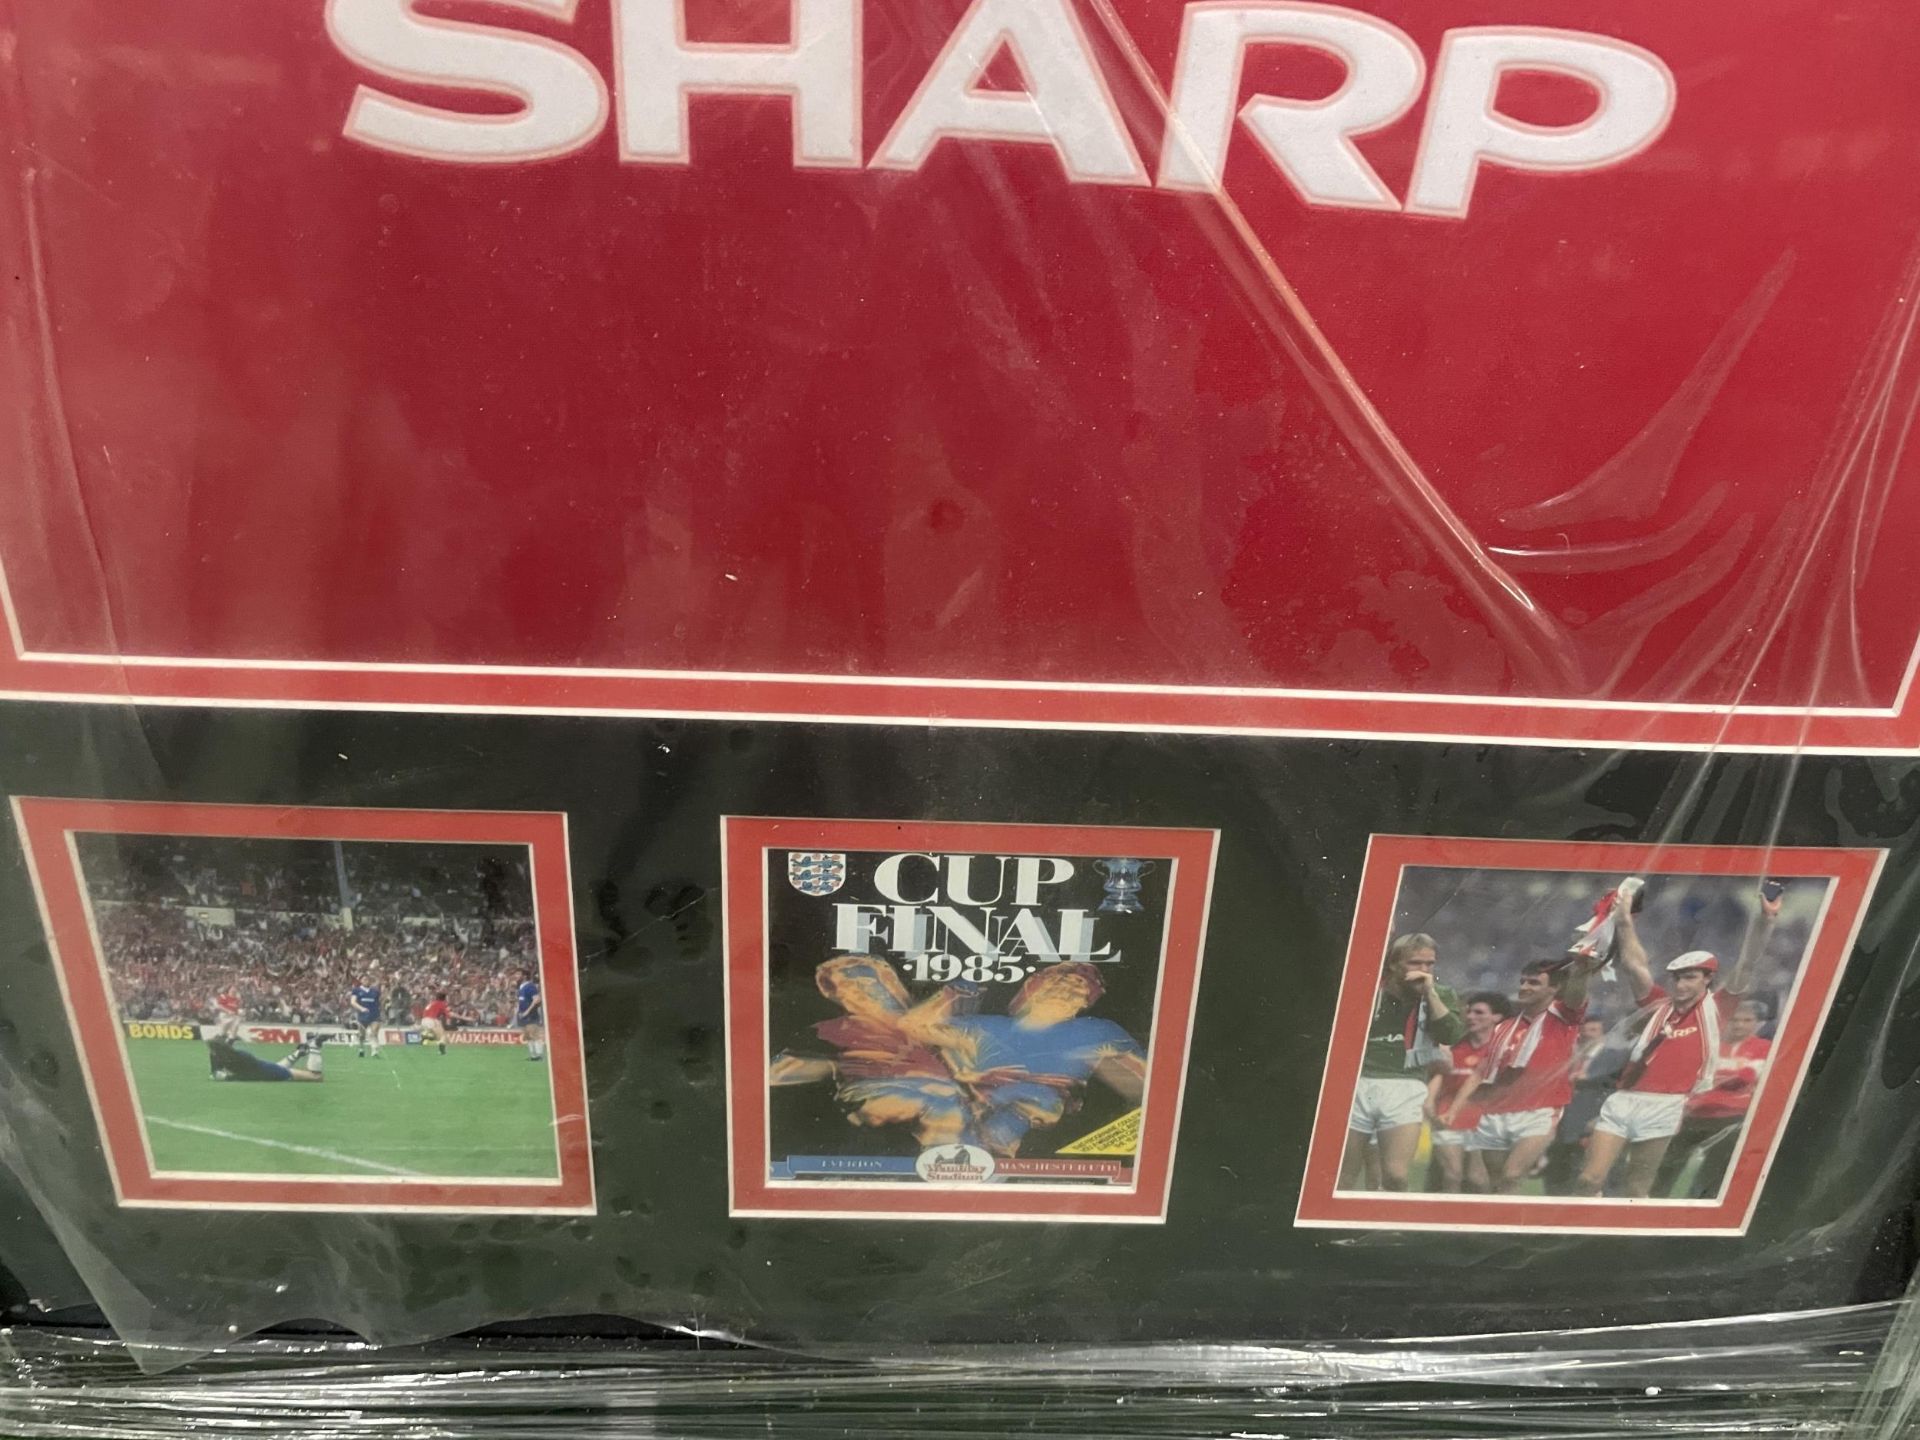 A FRAMED AND SIGNED BY NORMAN WHITESIDE 1985 CUP FINAL MONTAGE - Image 4 of 4